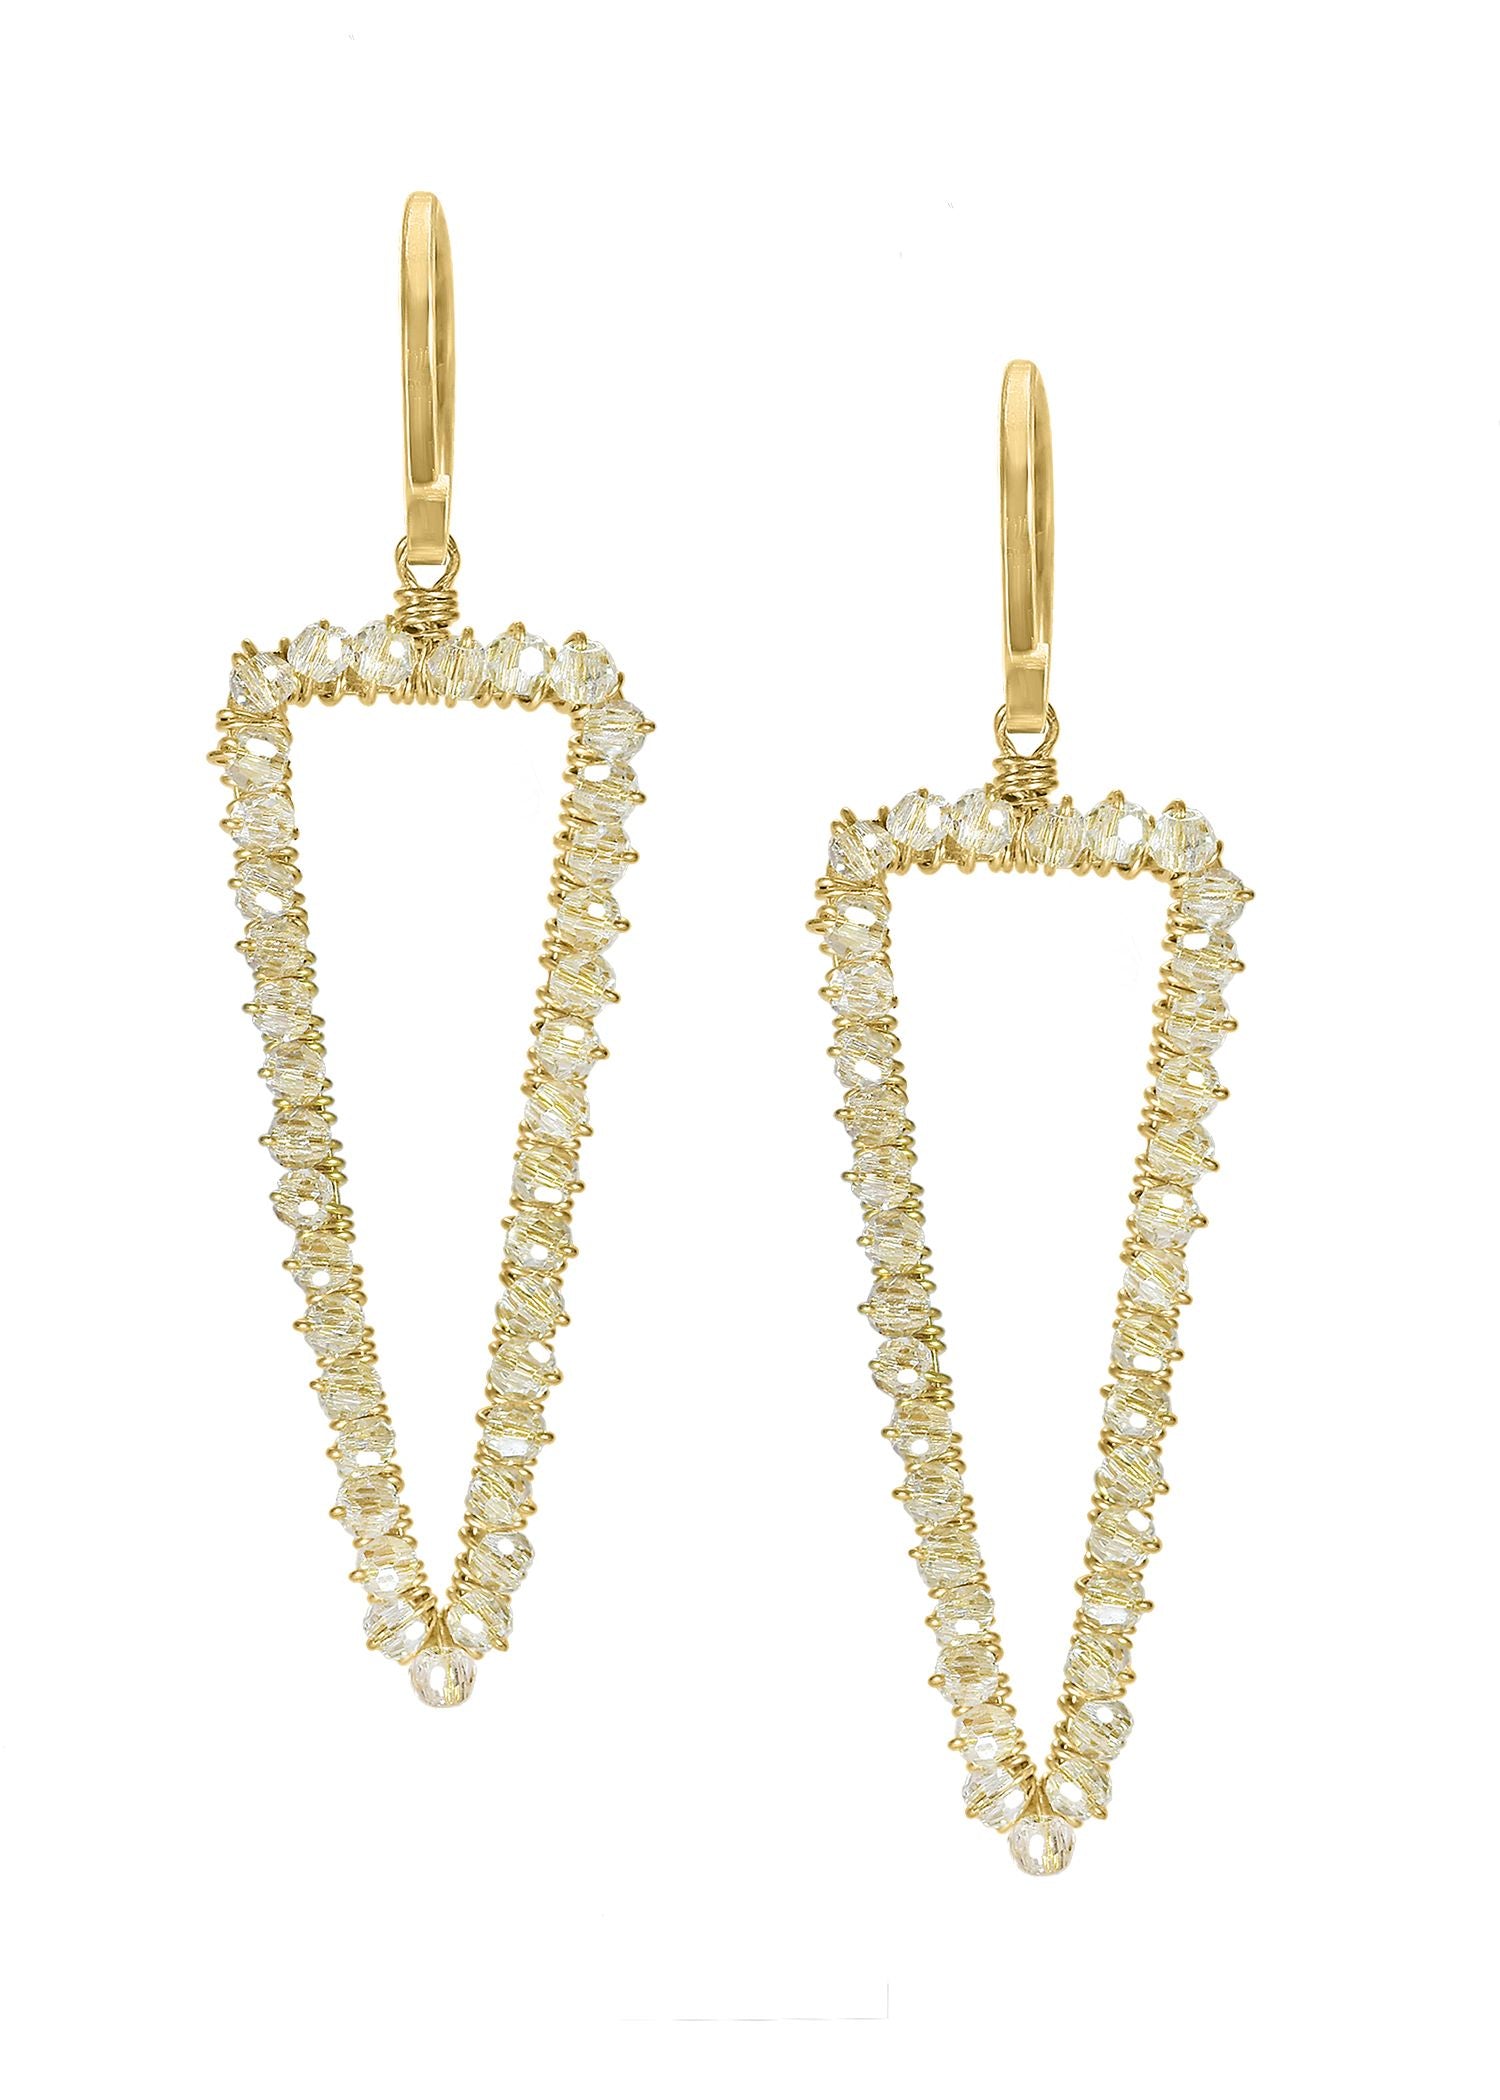 Crystal 14k gold fill Earrings measure 1-3/4" in length (including the ear wires) and 15/16" in width Handmade in our Los Angeles studio